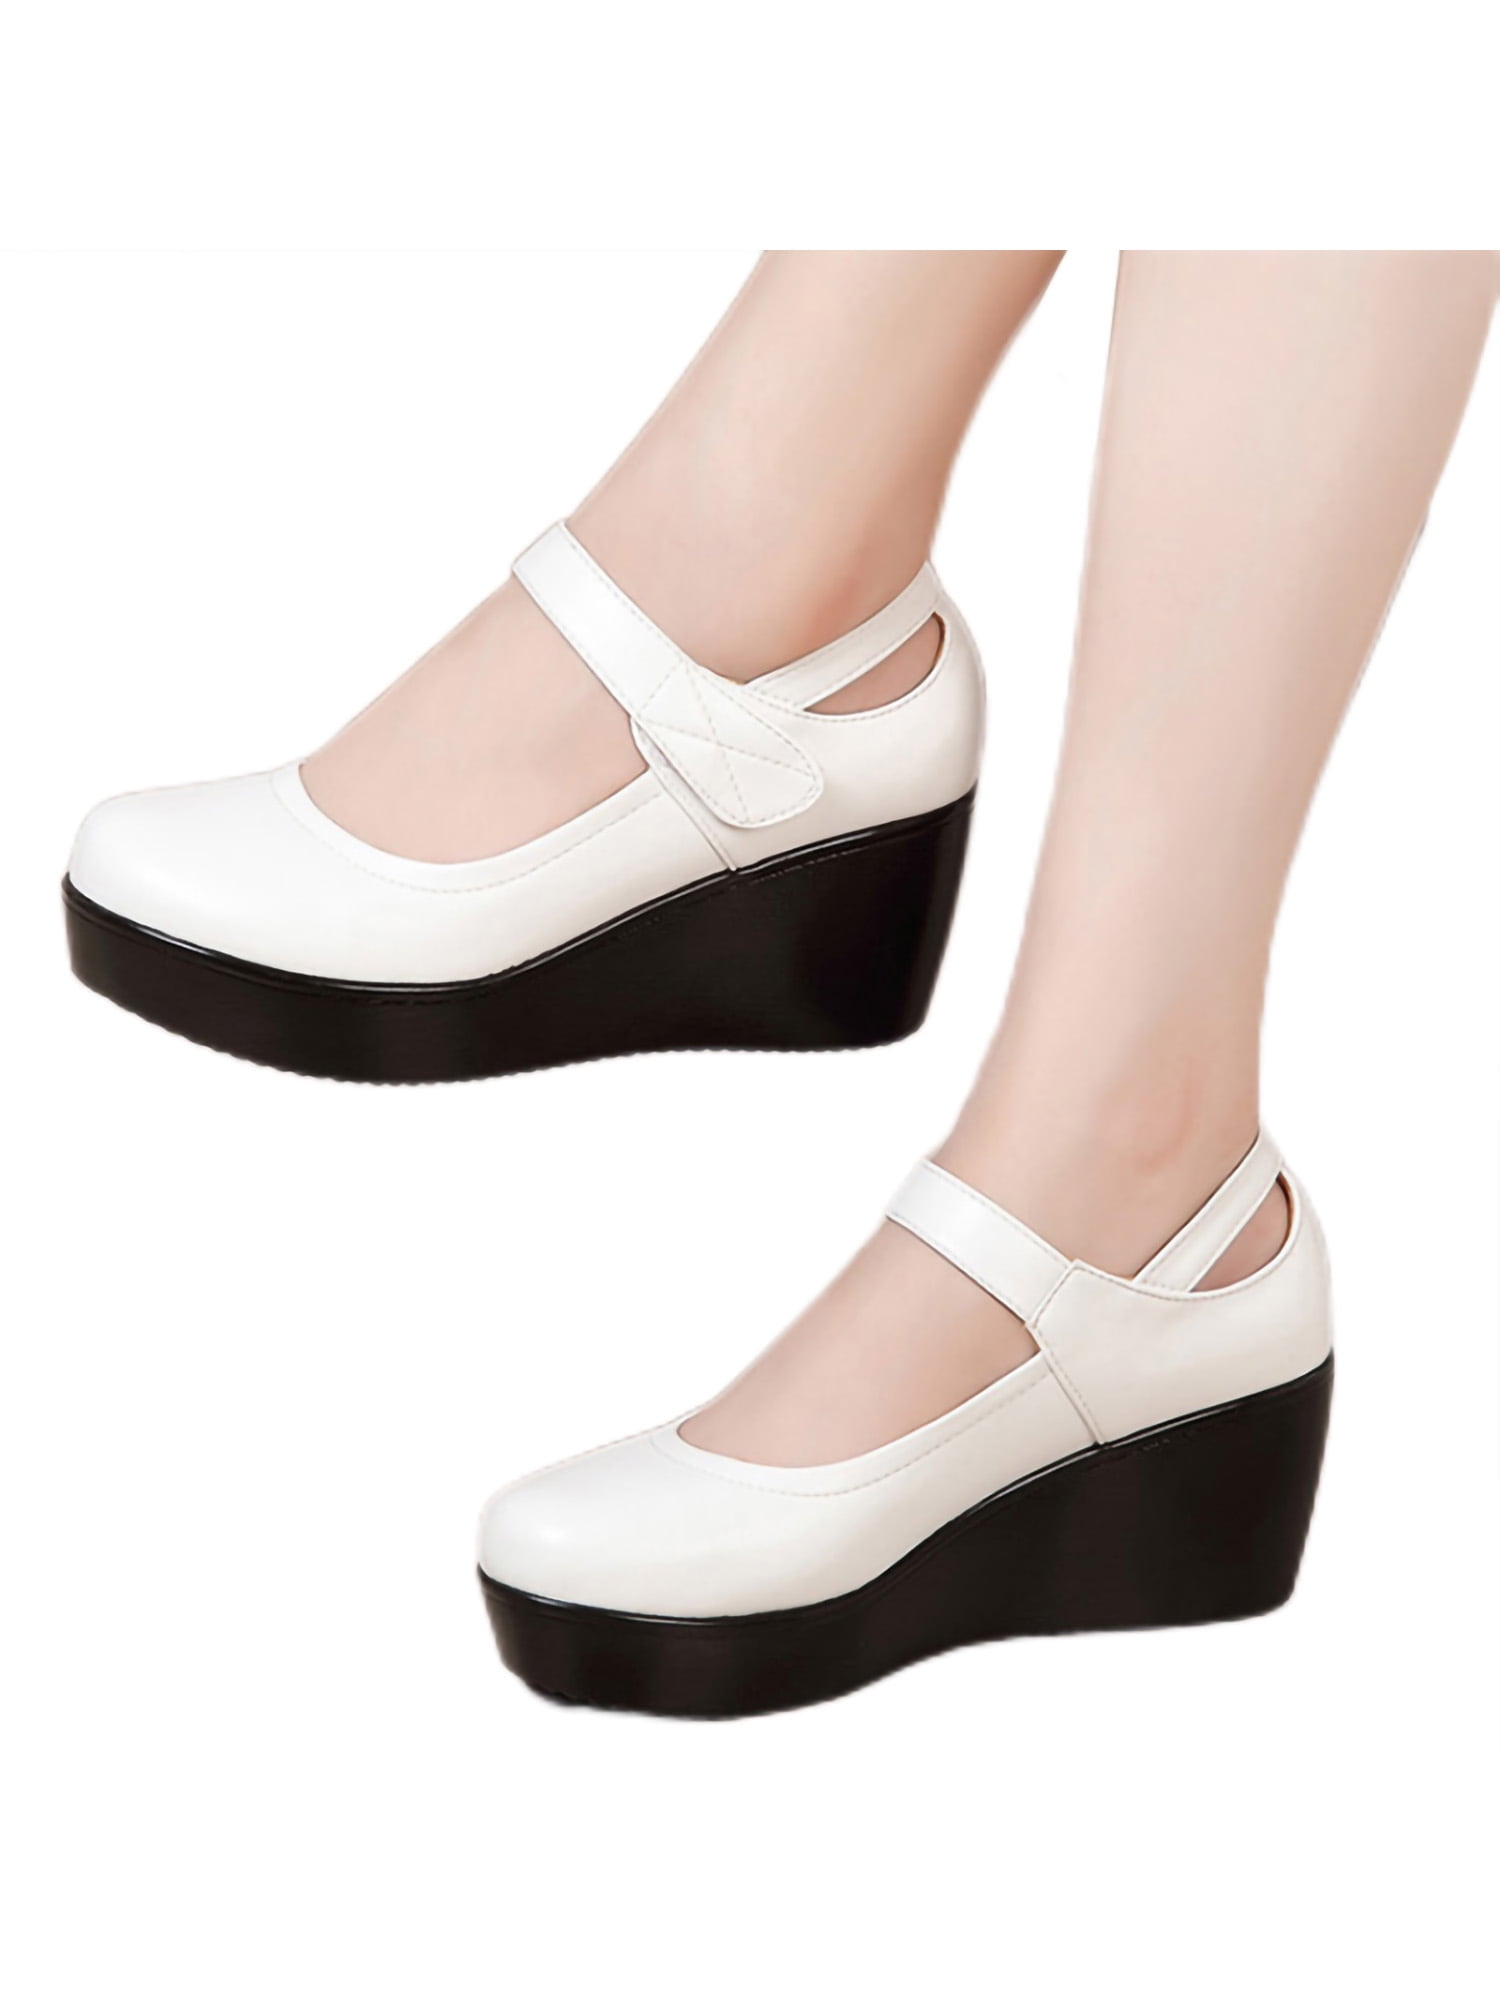 Ritualay Women Mary Jane Ankle Strap Pumps Wedge Casual Shoes Comfort ...